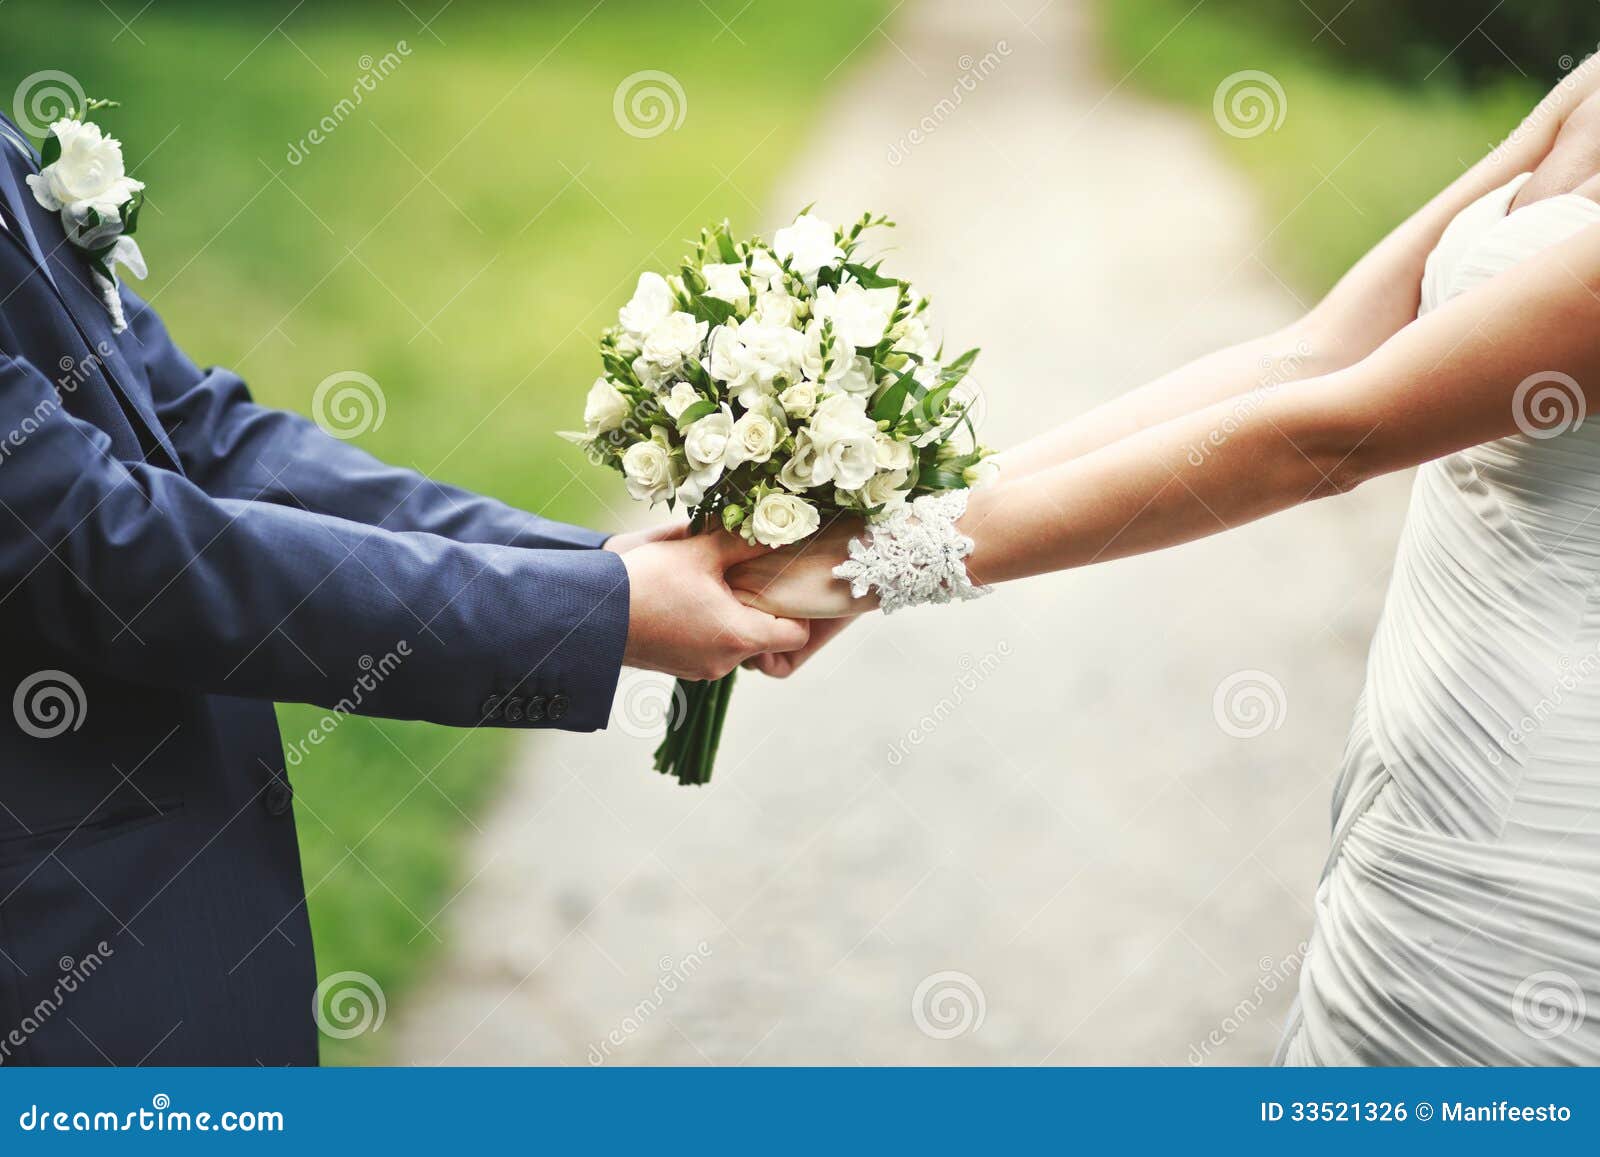 hands of a newly wed couple together